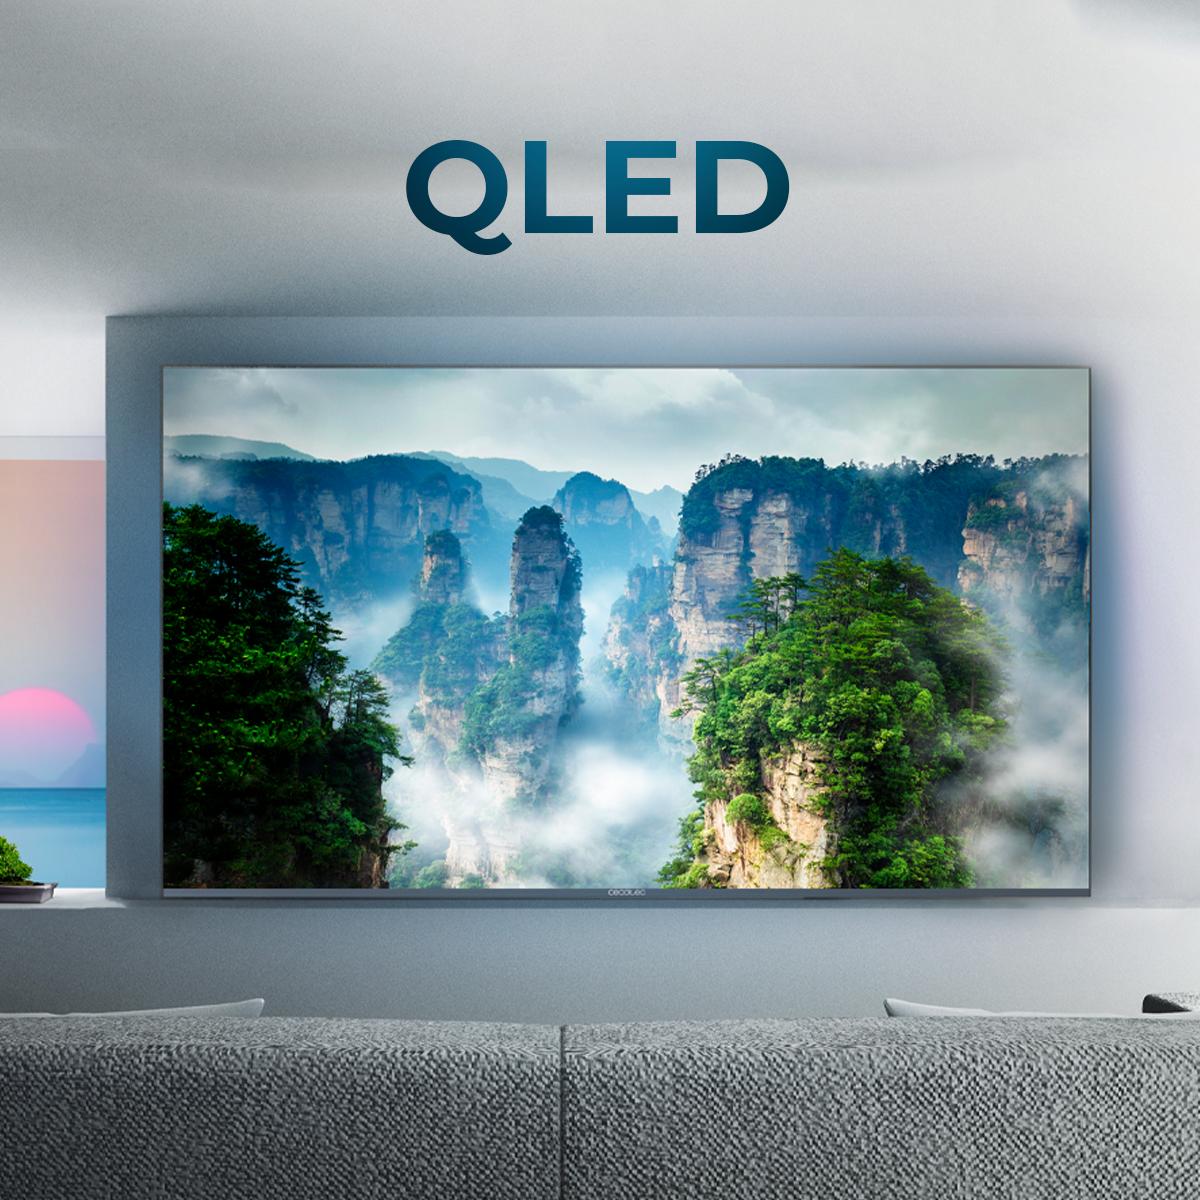 Cecotec Televisor LED 55 Smart TV A2 Series ALU20055S. 4K UHD, Android 11,  Diseño sin Marco, MEMC, Dolby Vision y Dolby Atmos, HDR10, 2 Altavoces de